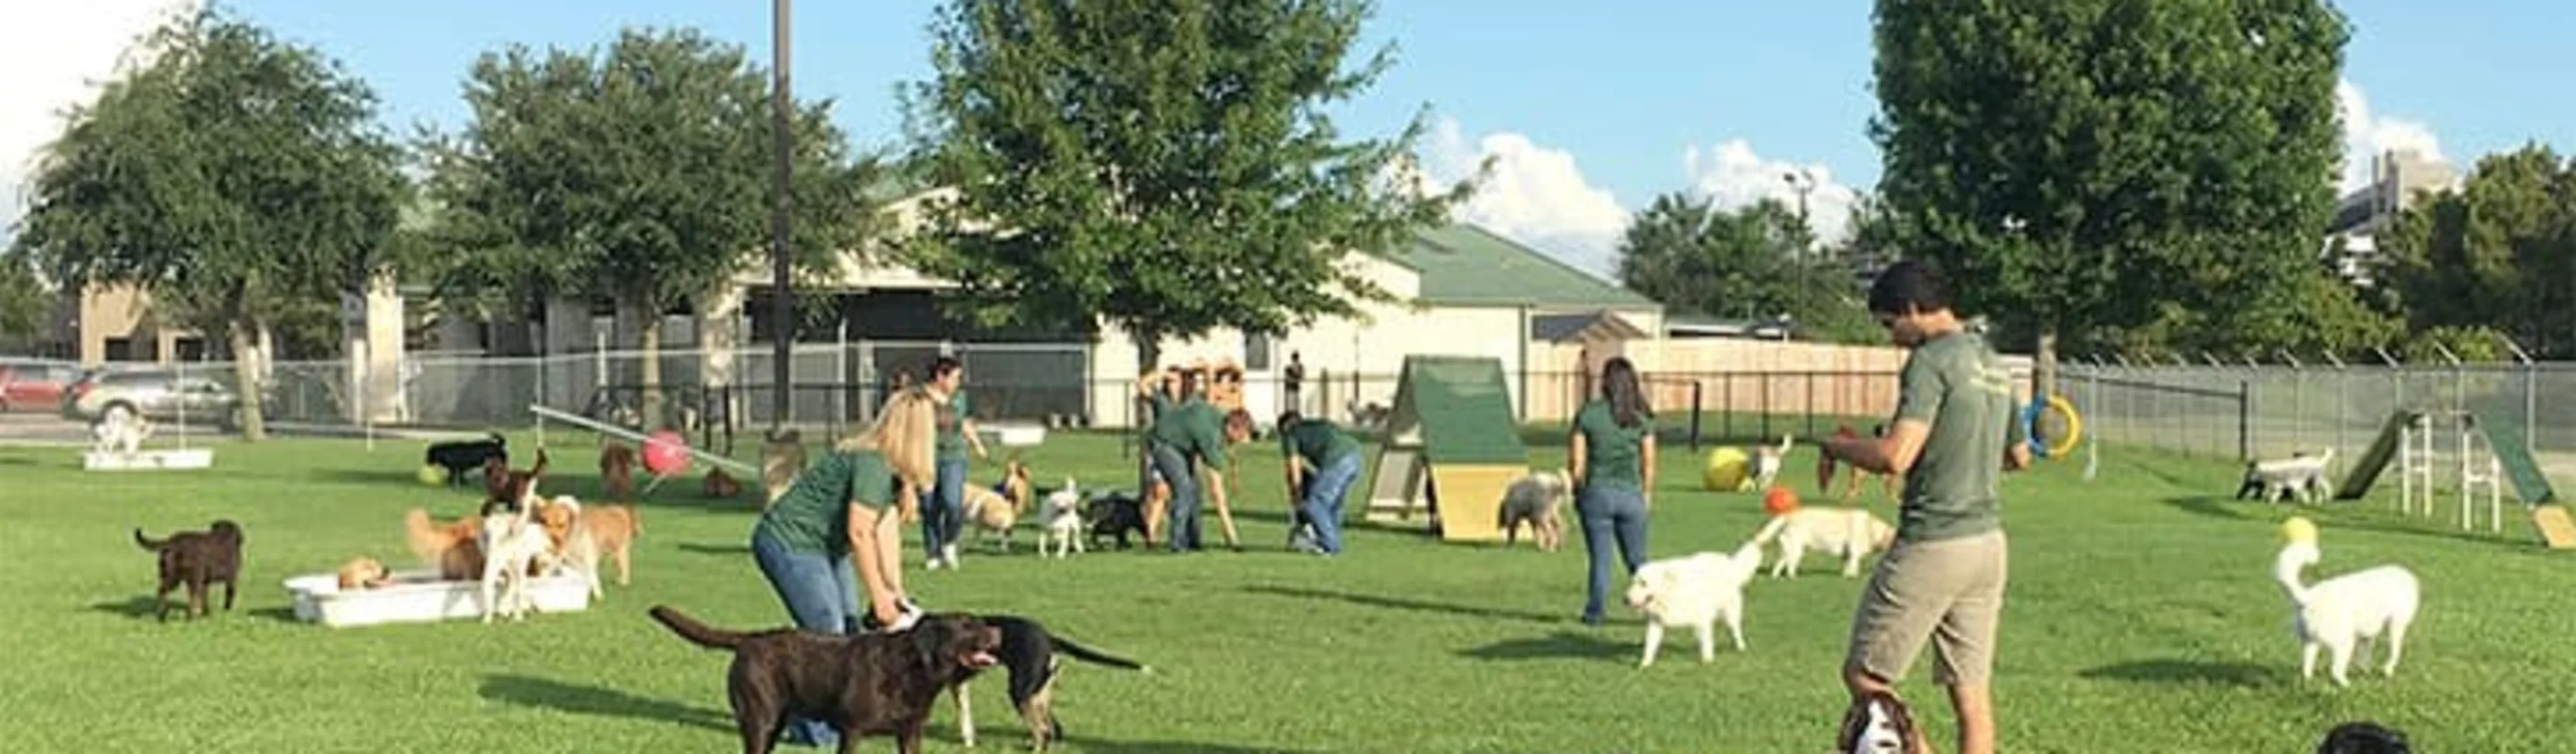 Staff with dogs in grassy play yard.